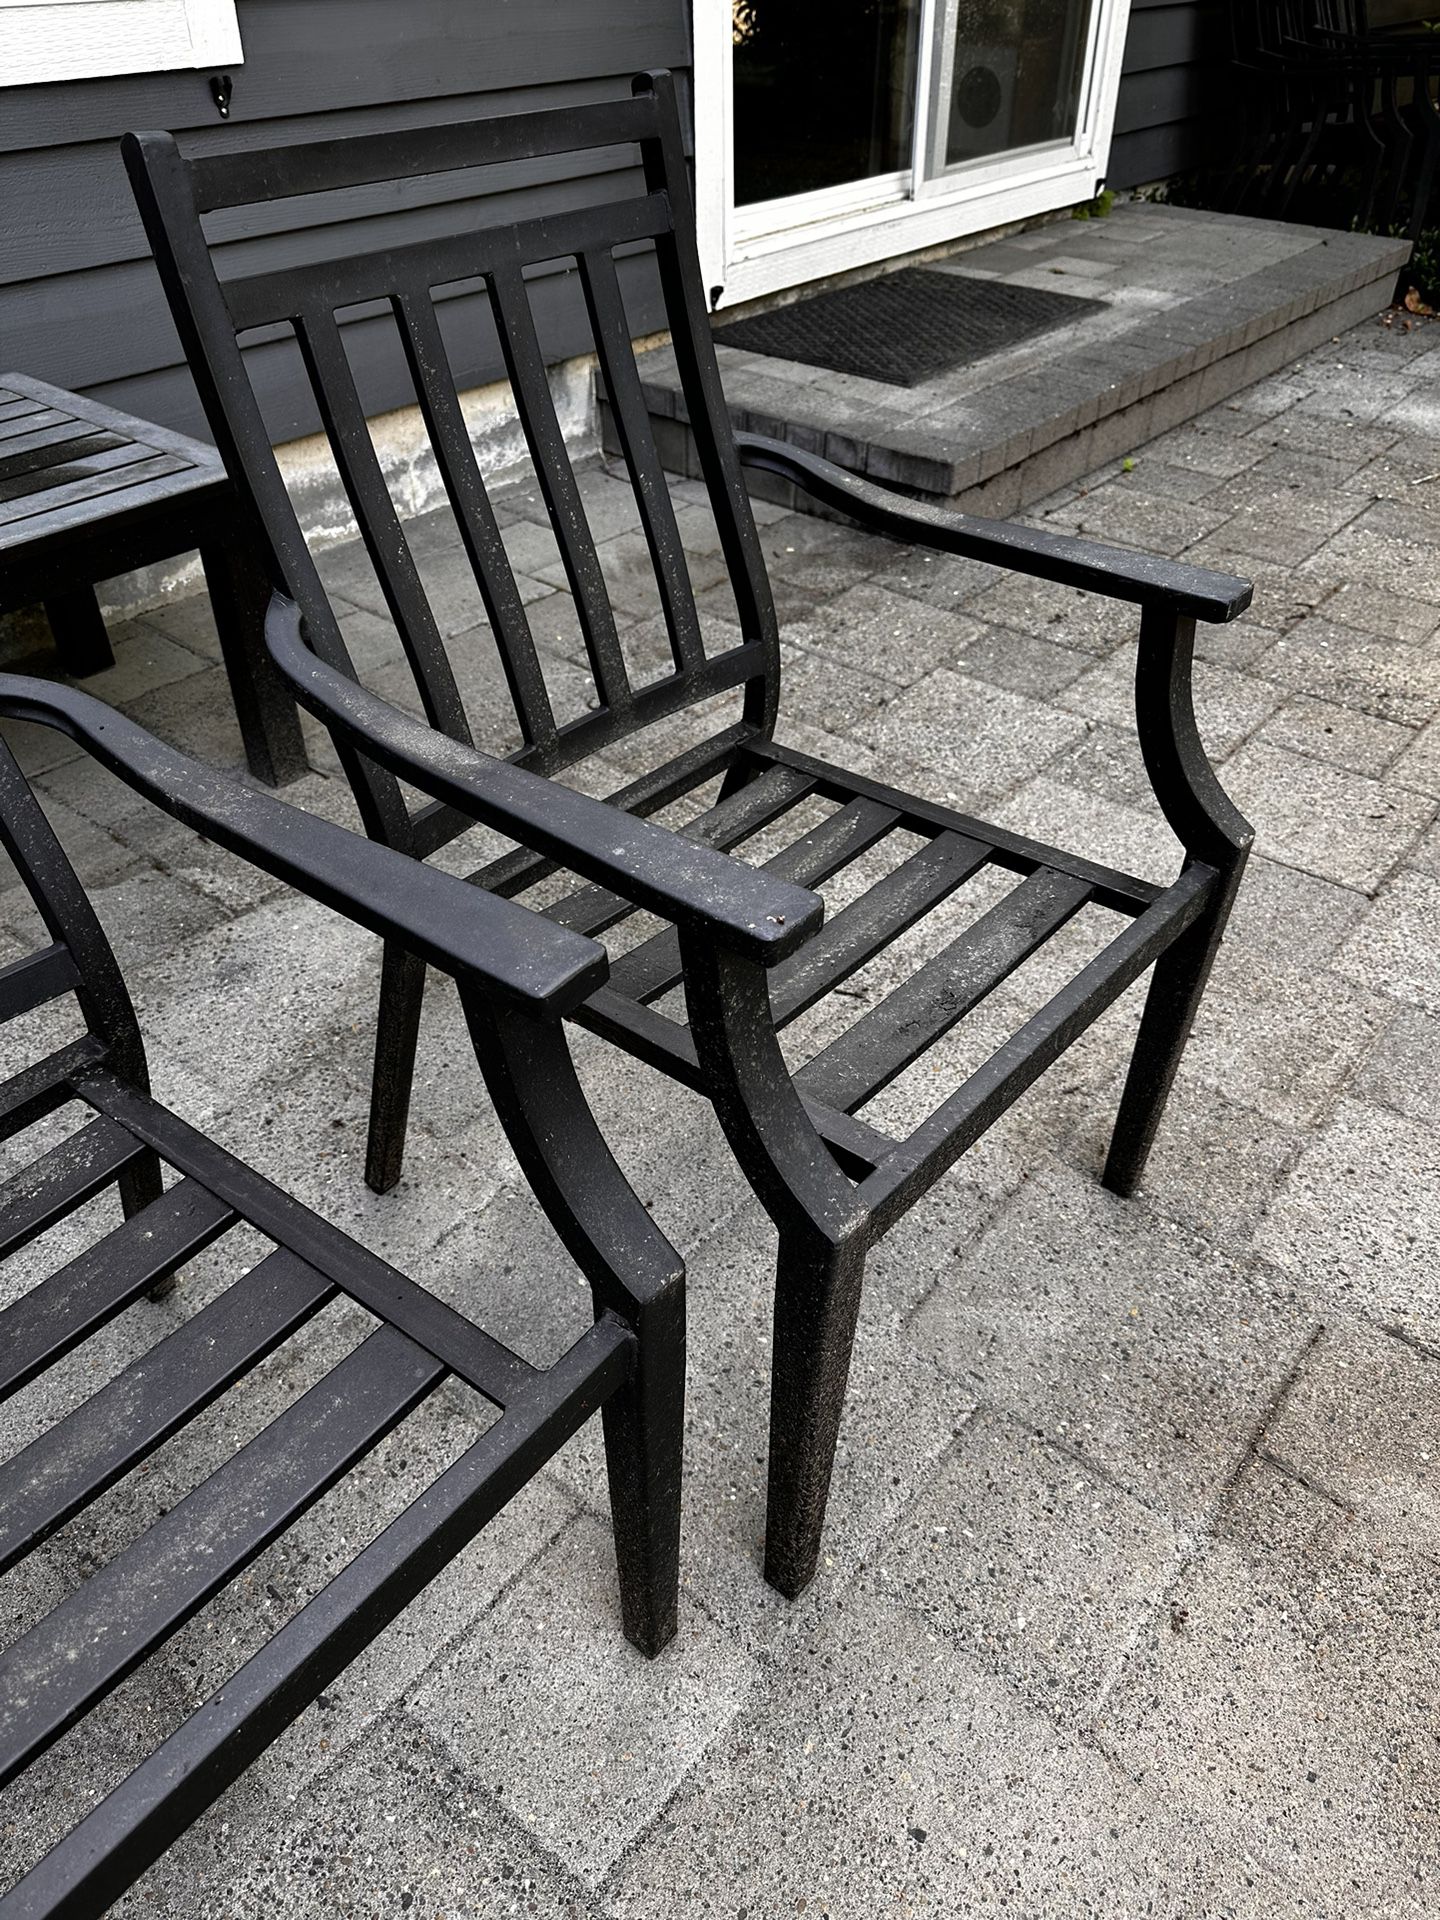 6 Black Outdoor Chairs